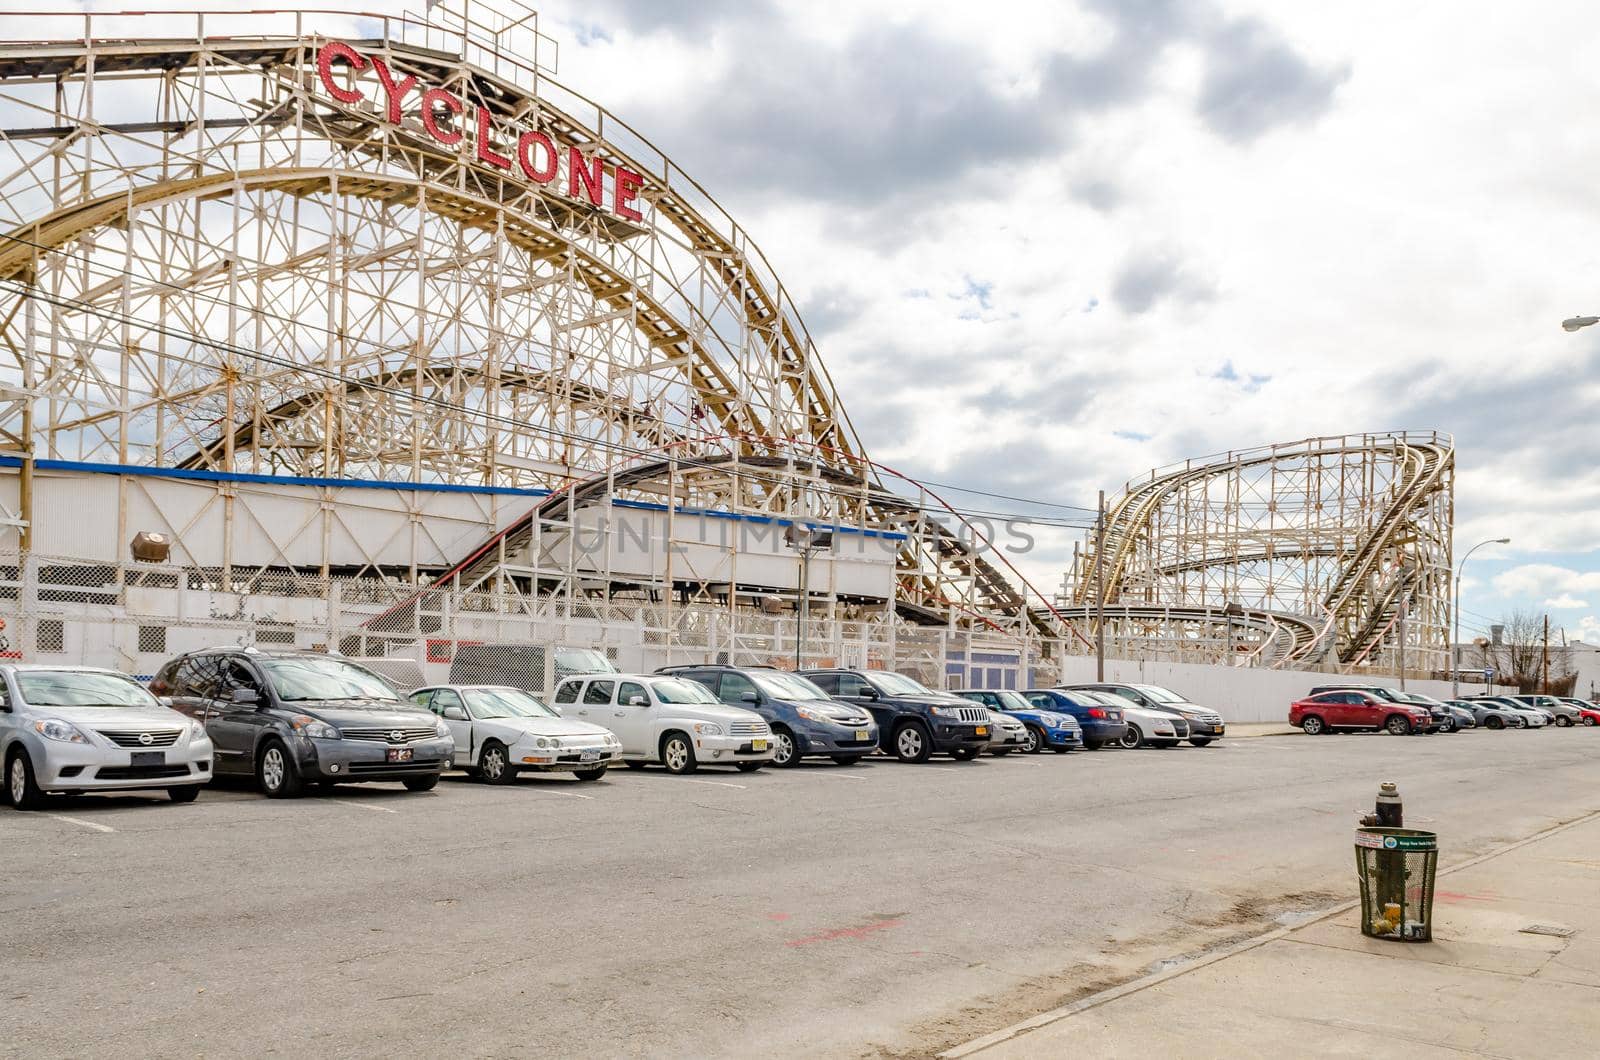 Cyclone Wooden Rollercoaster at Luna Park Amusement Park, Coney island, Brooklyn, view from the side with lots of cars parked in front next to the street, New York City during winter day with cloudy sky, horizontal